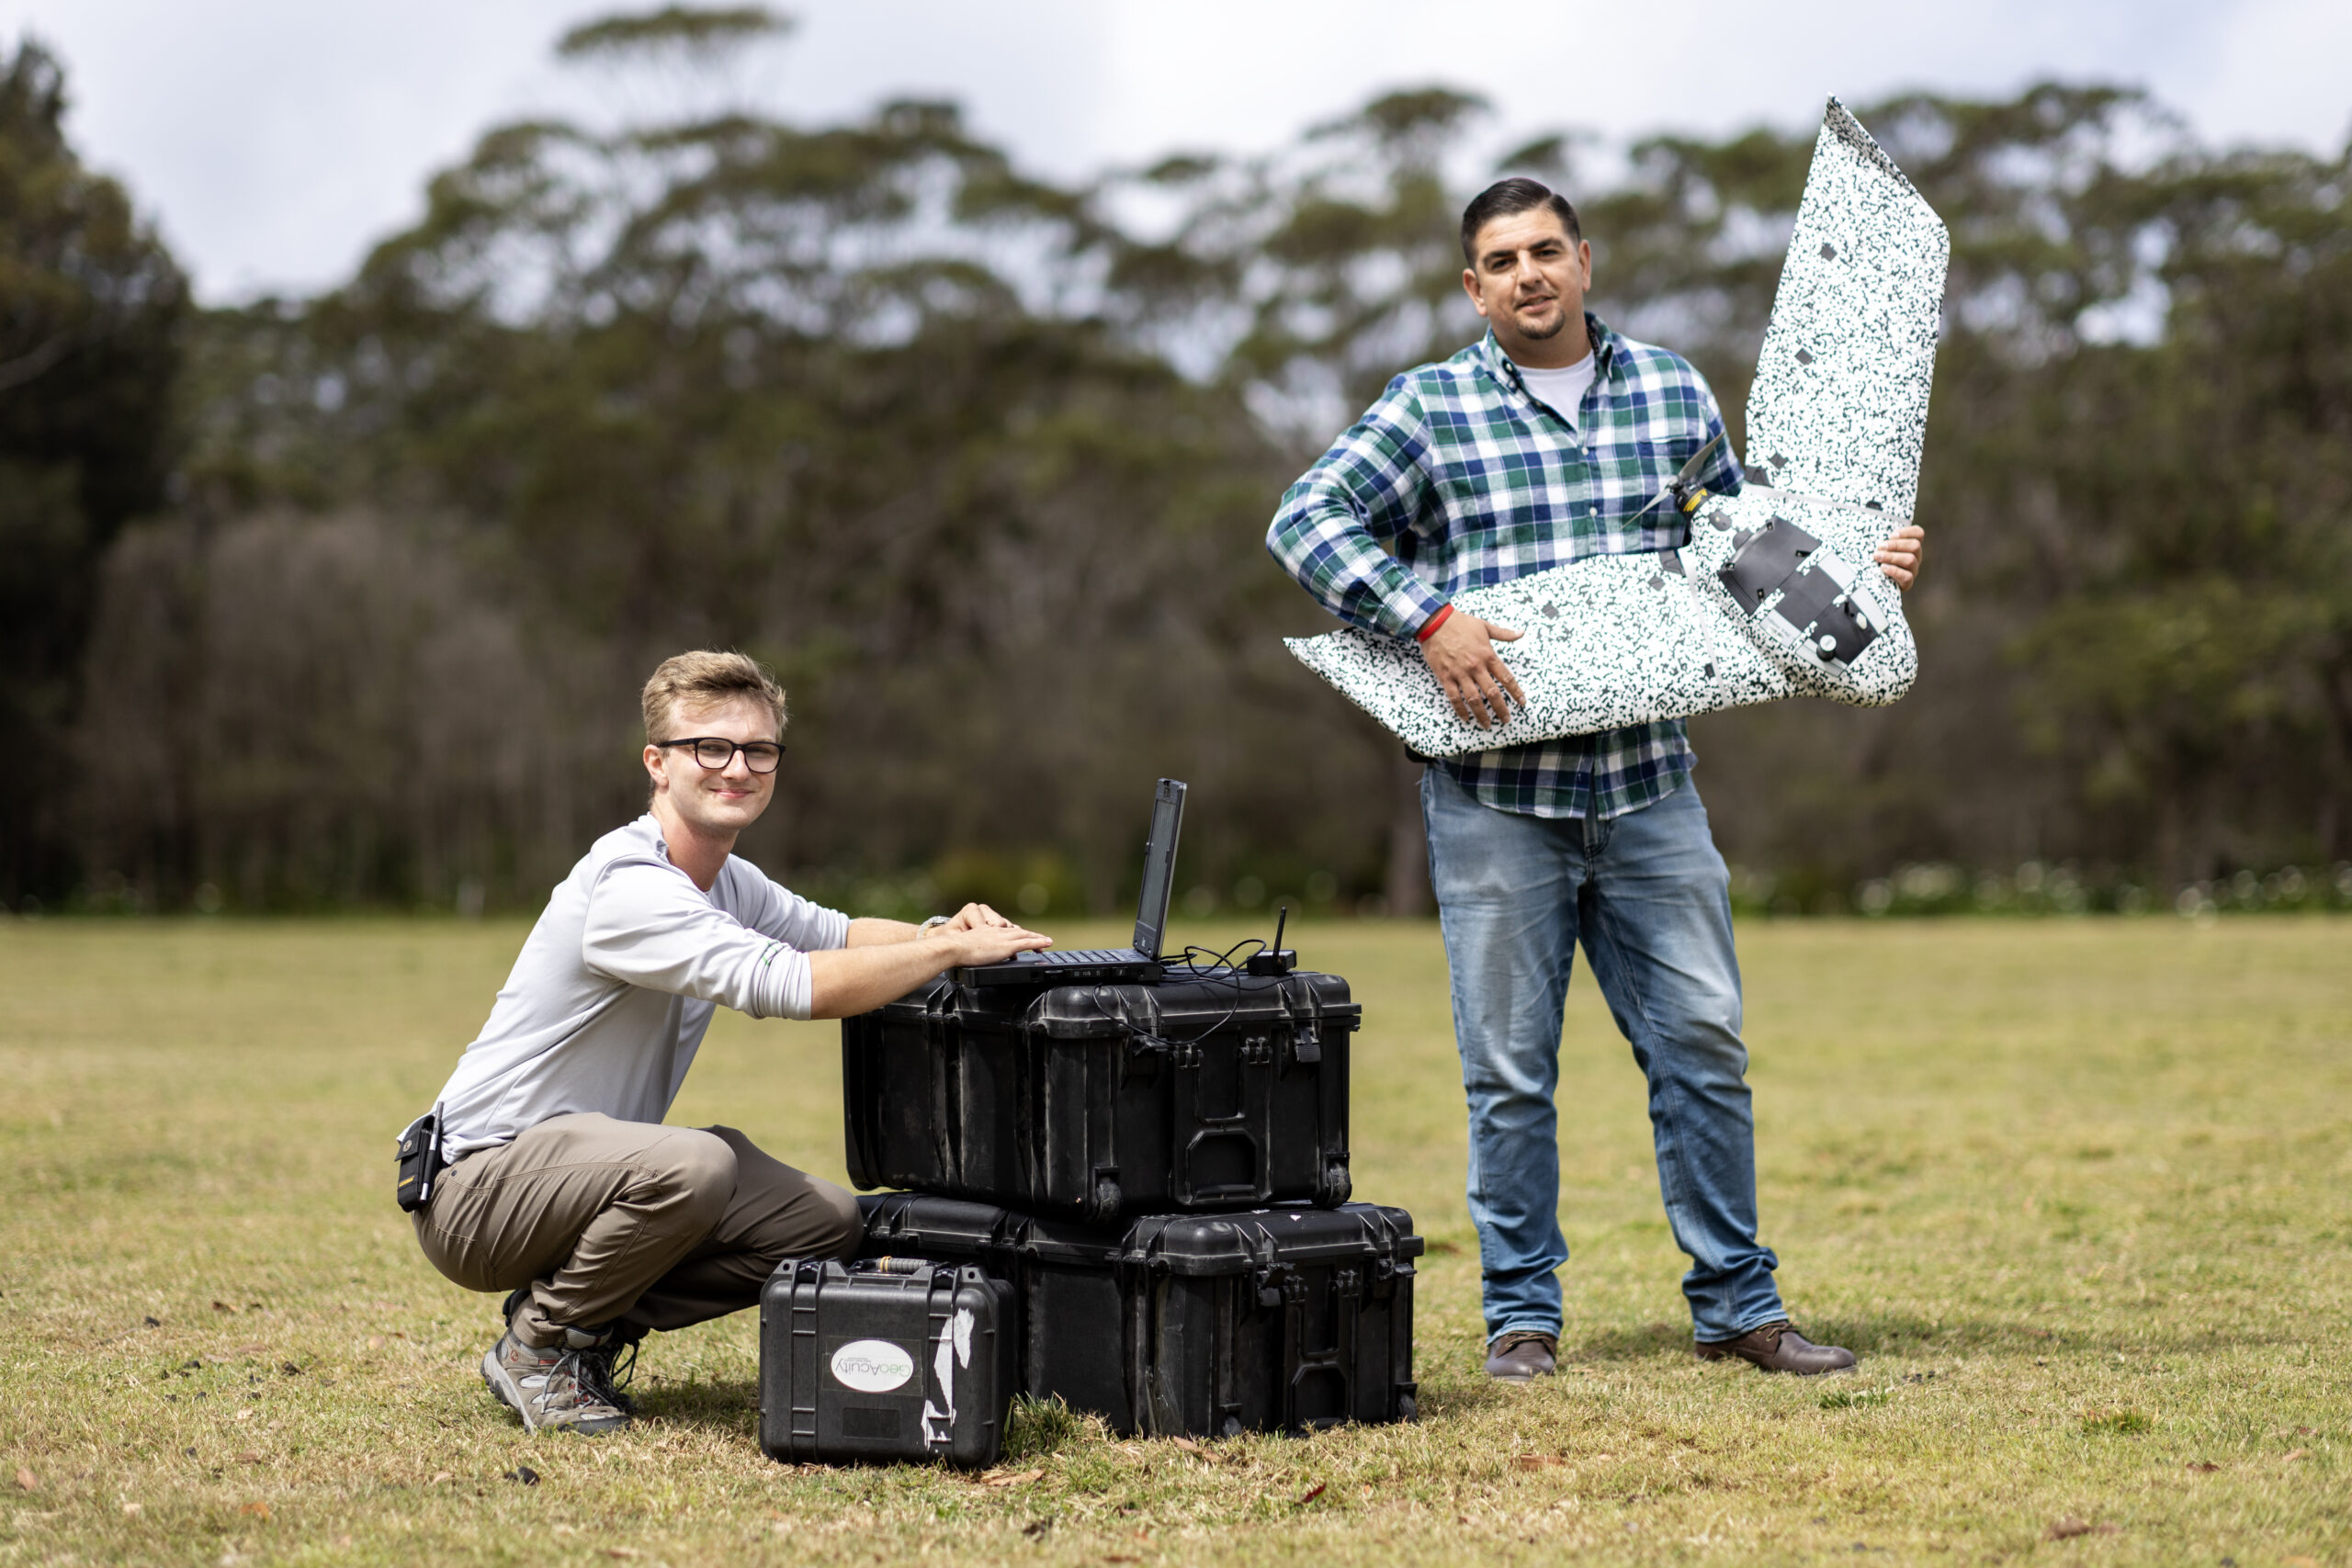 Will Forker and Luis Leal demonstrate the EB-EBEE TAC during the Technical Cooperation Program AI Strategic Challenge 2023 at HMAS Creswell, Jervis Bay Territory. *** Local Caption *** The Technical Cooperation Program (TTCP) AI Strategic Challenge (AISC) 2023 will be held at HMAS Creswell, 09-27 October 2023.Bringing together Five Eyes (FVEY) nations personnel, AISC 2023 will have a program of live experiments and demonstrations across a variety of systems, situated in a scenario representative of a full military operation. AISC 2023 is seeking to accelerate the transition of Artificial Intelligence (AI) solutions into the hands of coalition armed forces.